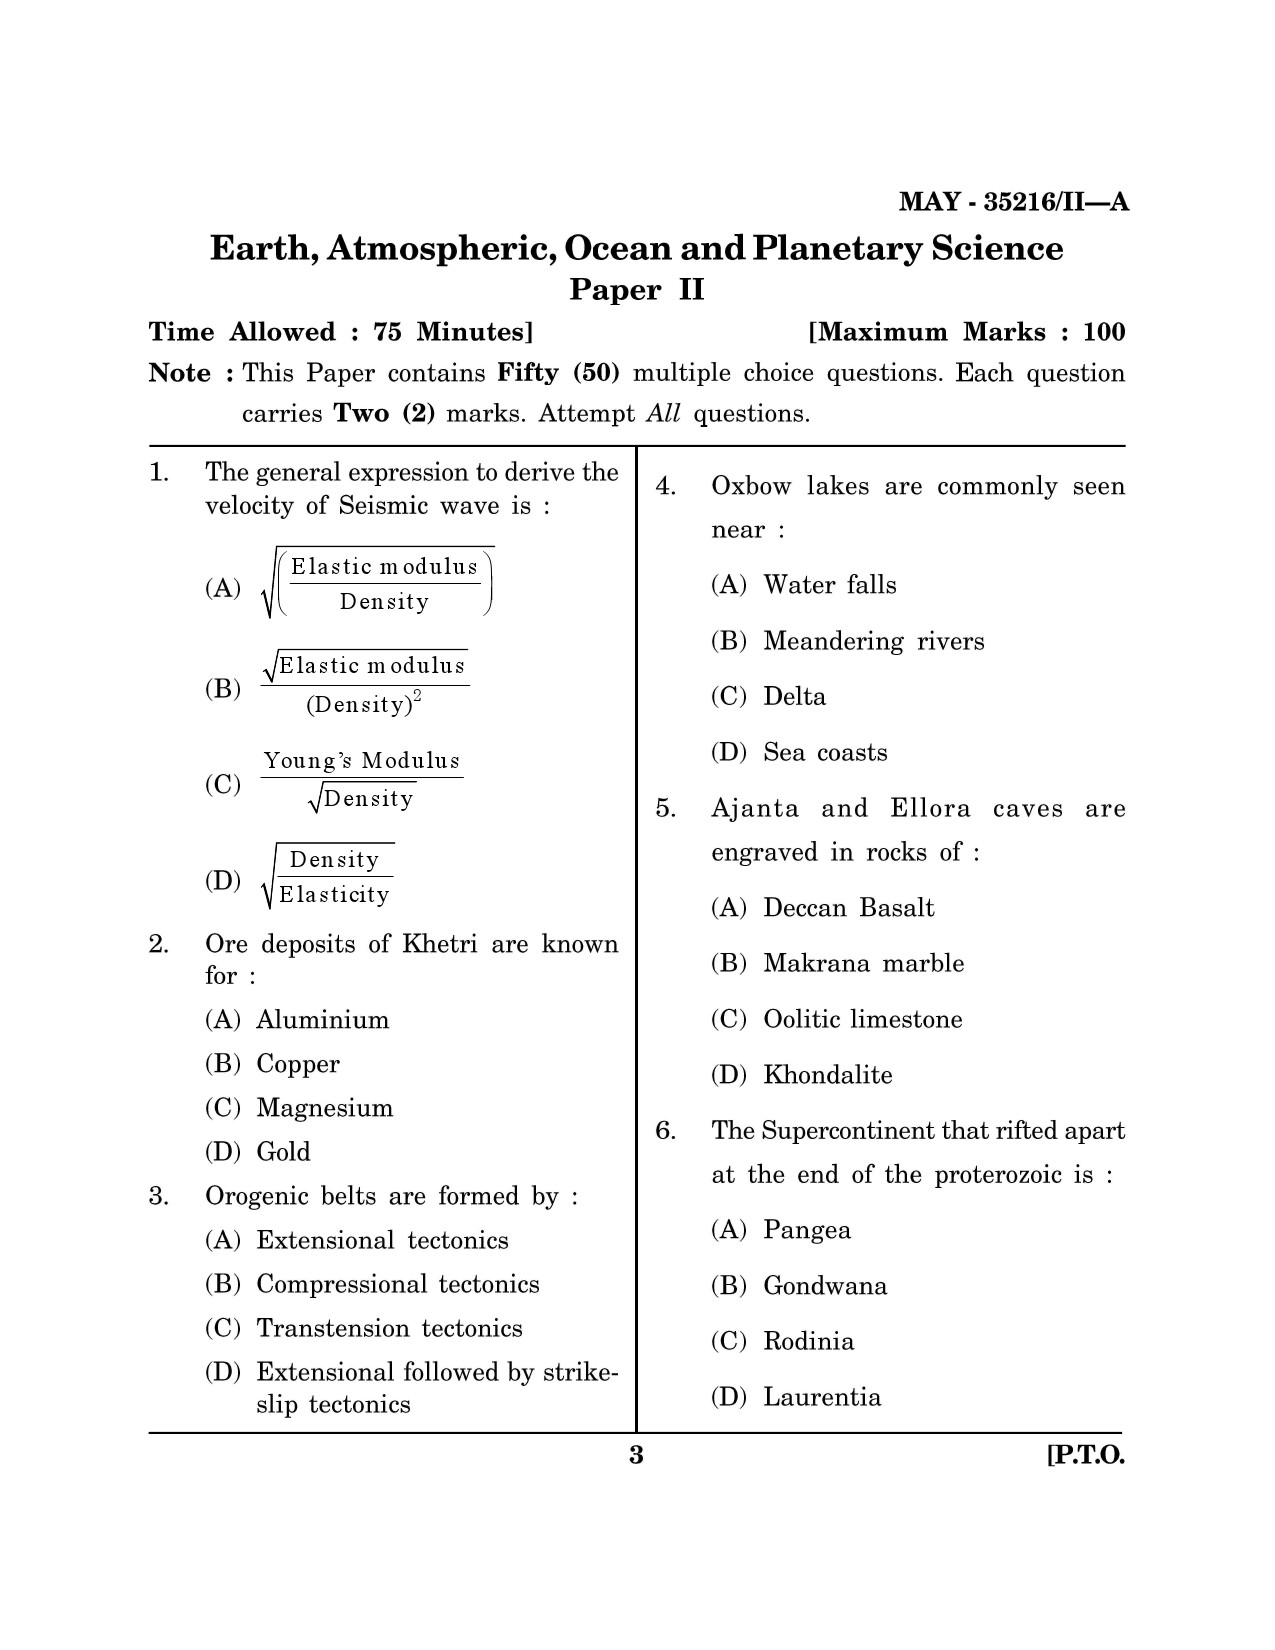 Maharashtra SET Earth Atmospheric Ocean Planetary Science Question Paper II May 2016 2